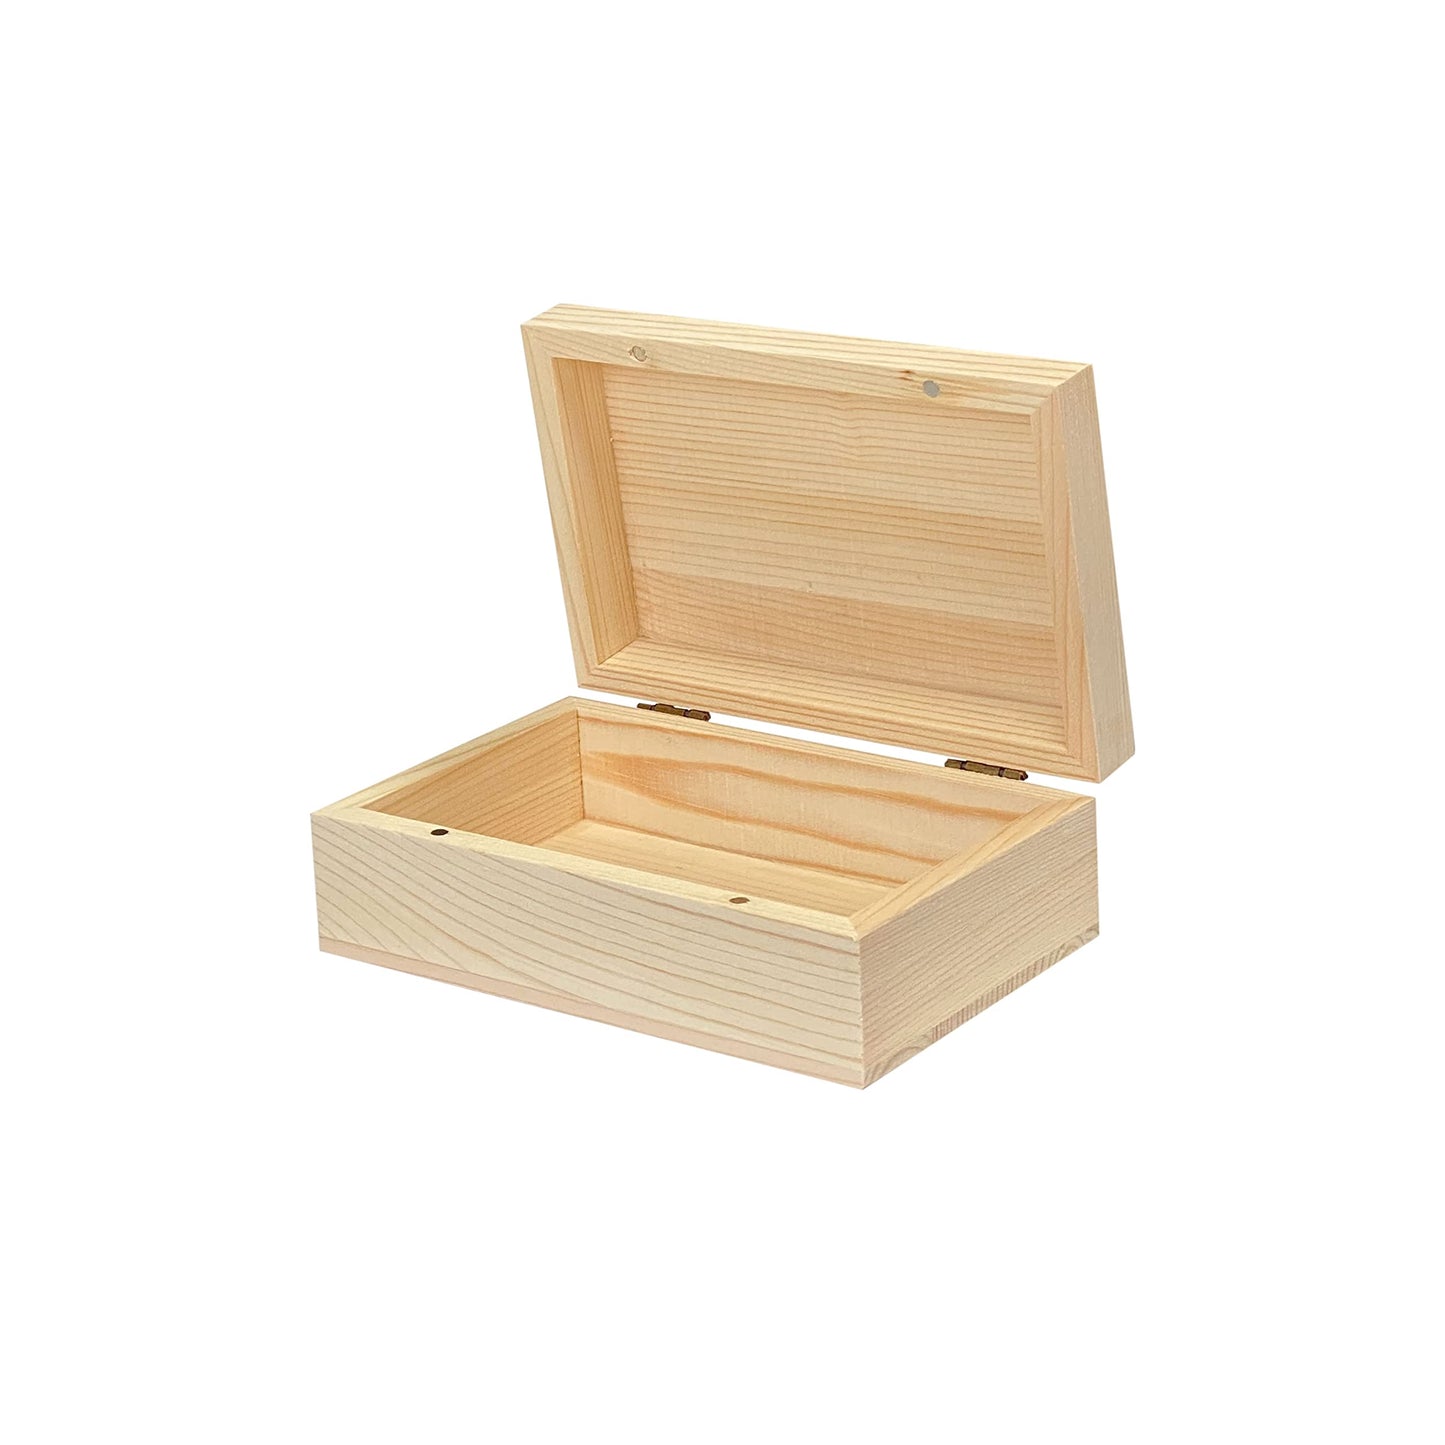 Cregugua 6-Pack Wooden Box Unfinished Rectangle Pine Wood Box for Crafts,Magnetic Hinged Lid (5.5 x 3.5 x 1.9 in)